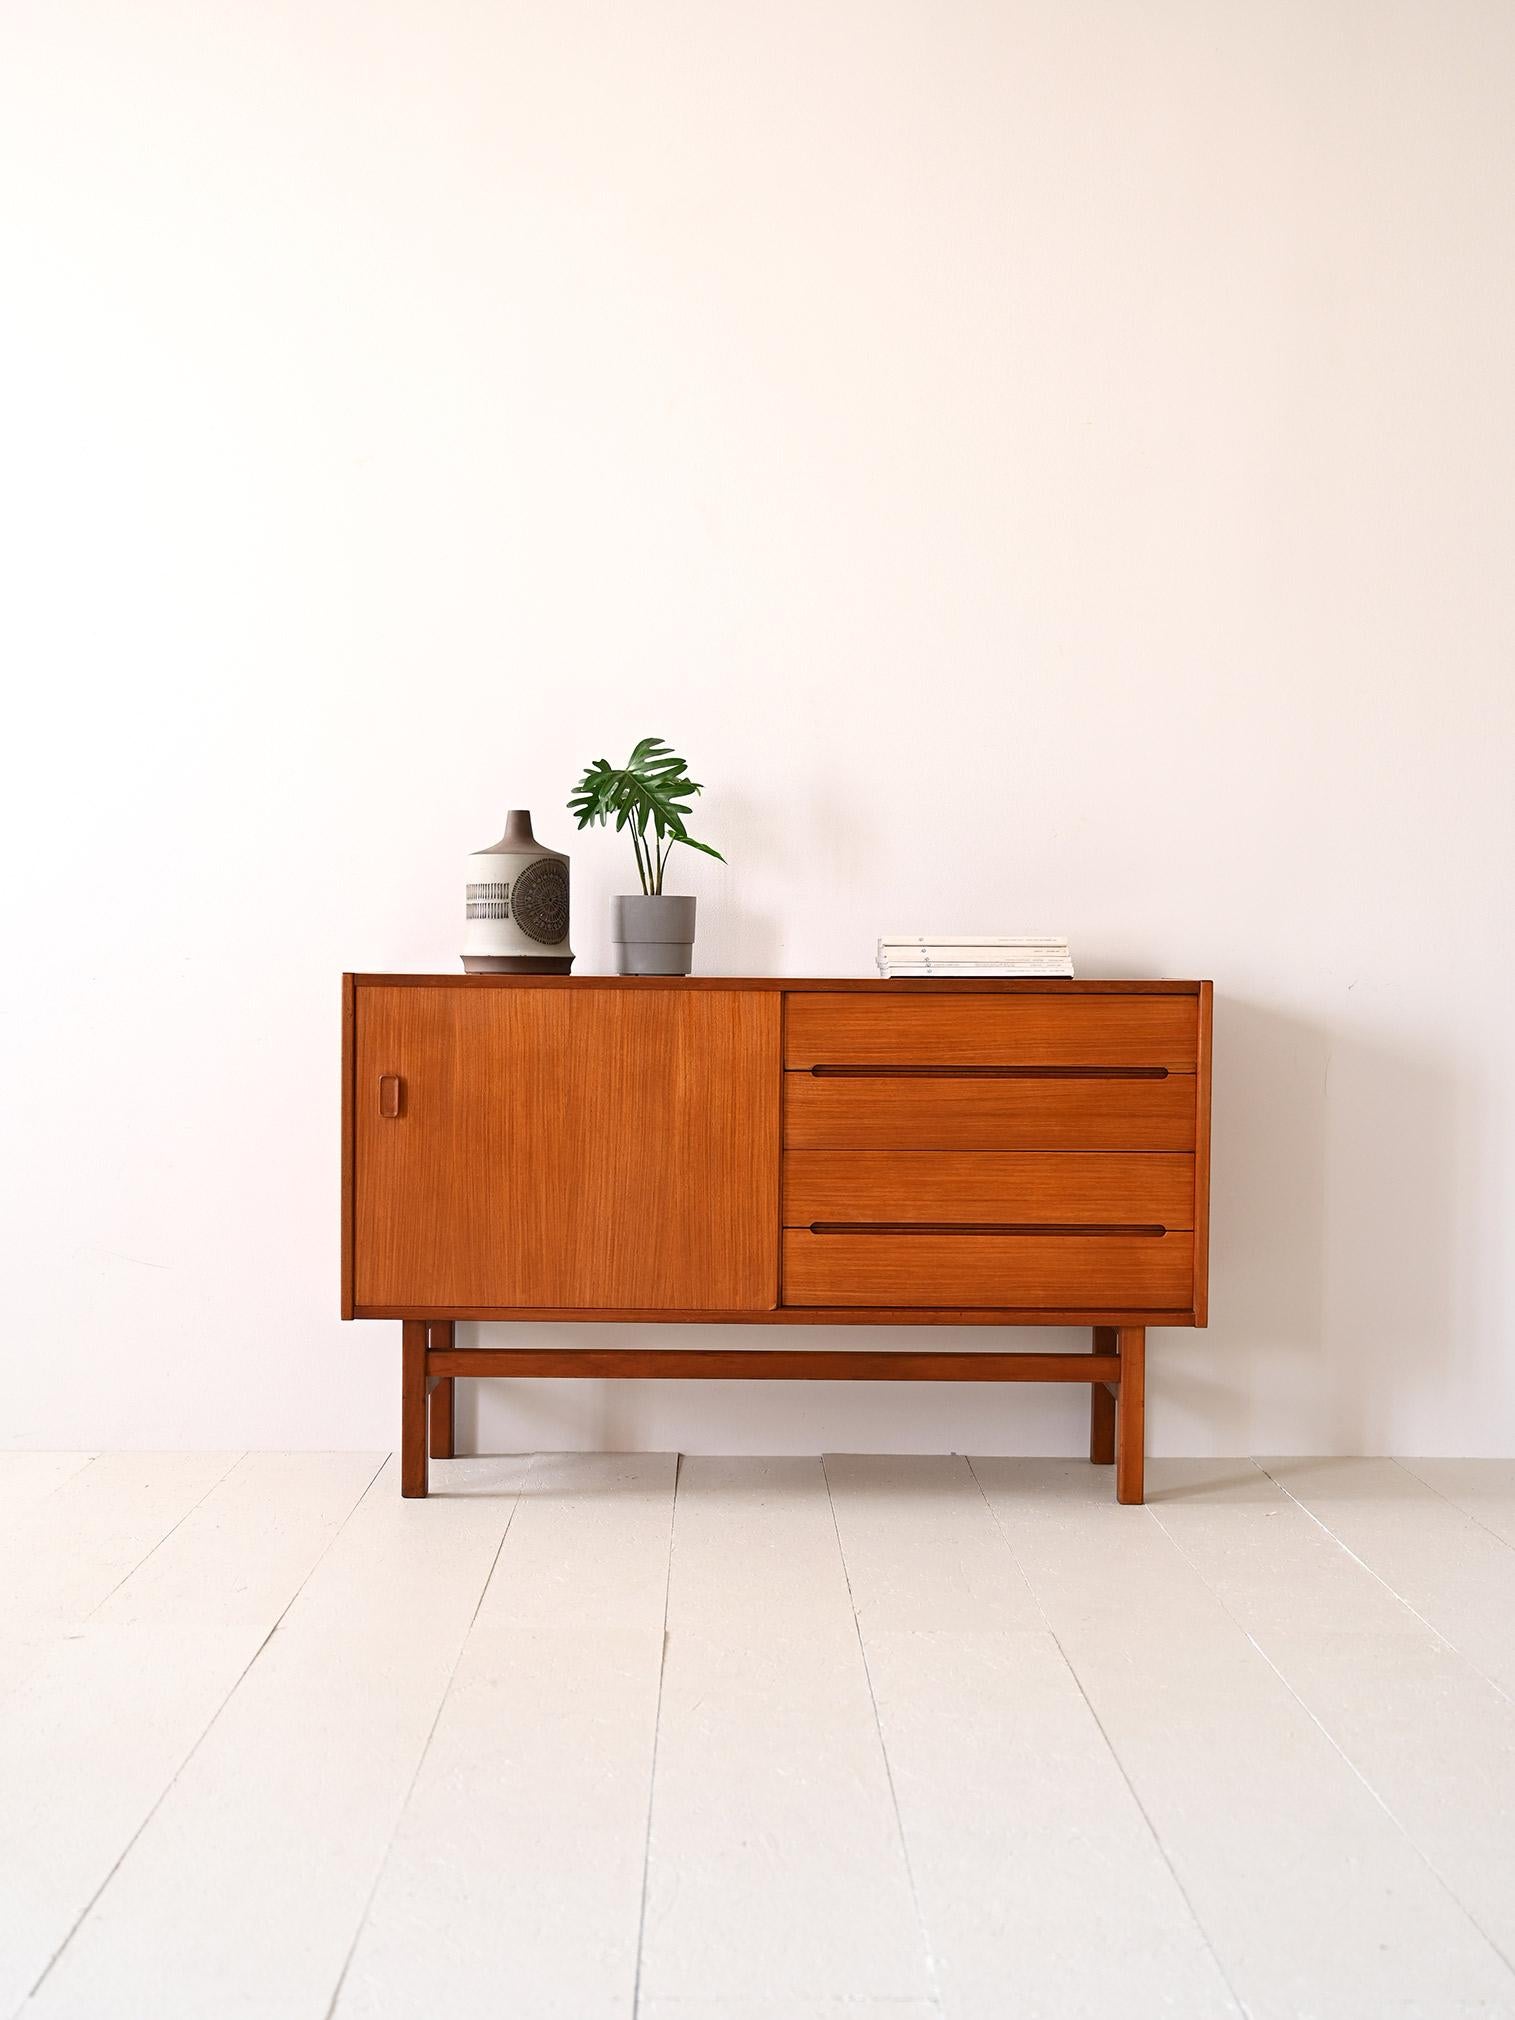 Scandinavian sideboard from the 1960s with drawers with a wood-carved handle.

This Swedish modern antique sideboard is an elegant piece of furniture with refined lines, consisting of a storage compartment with a sliding door on one side and two